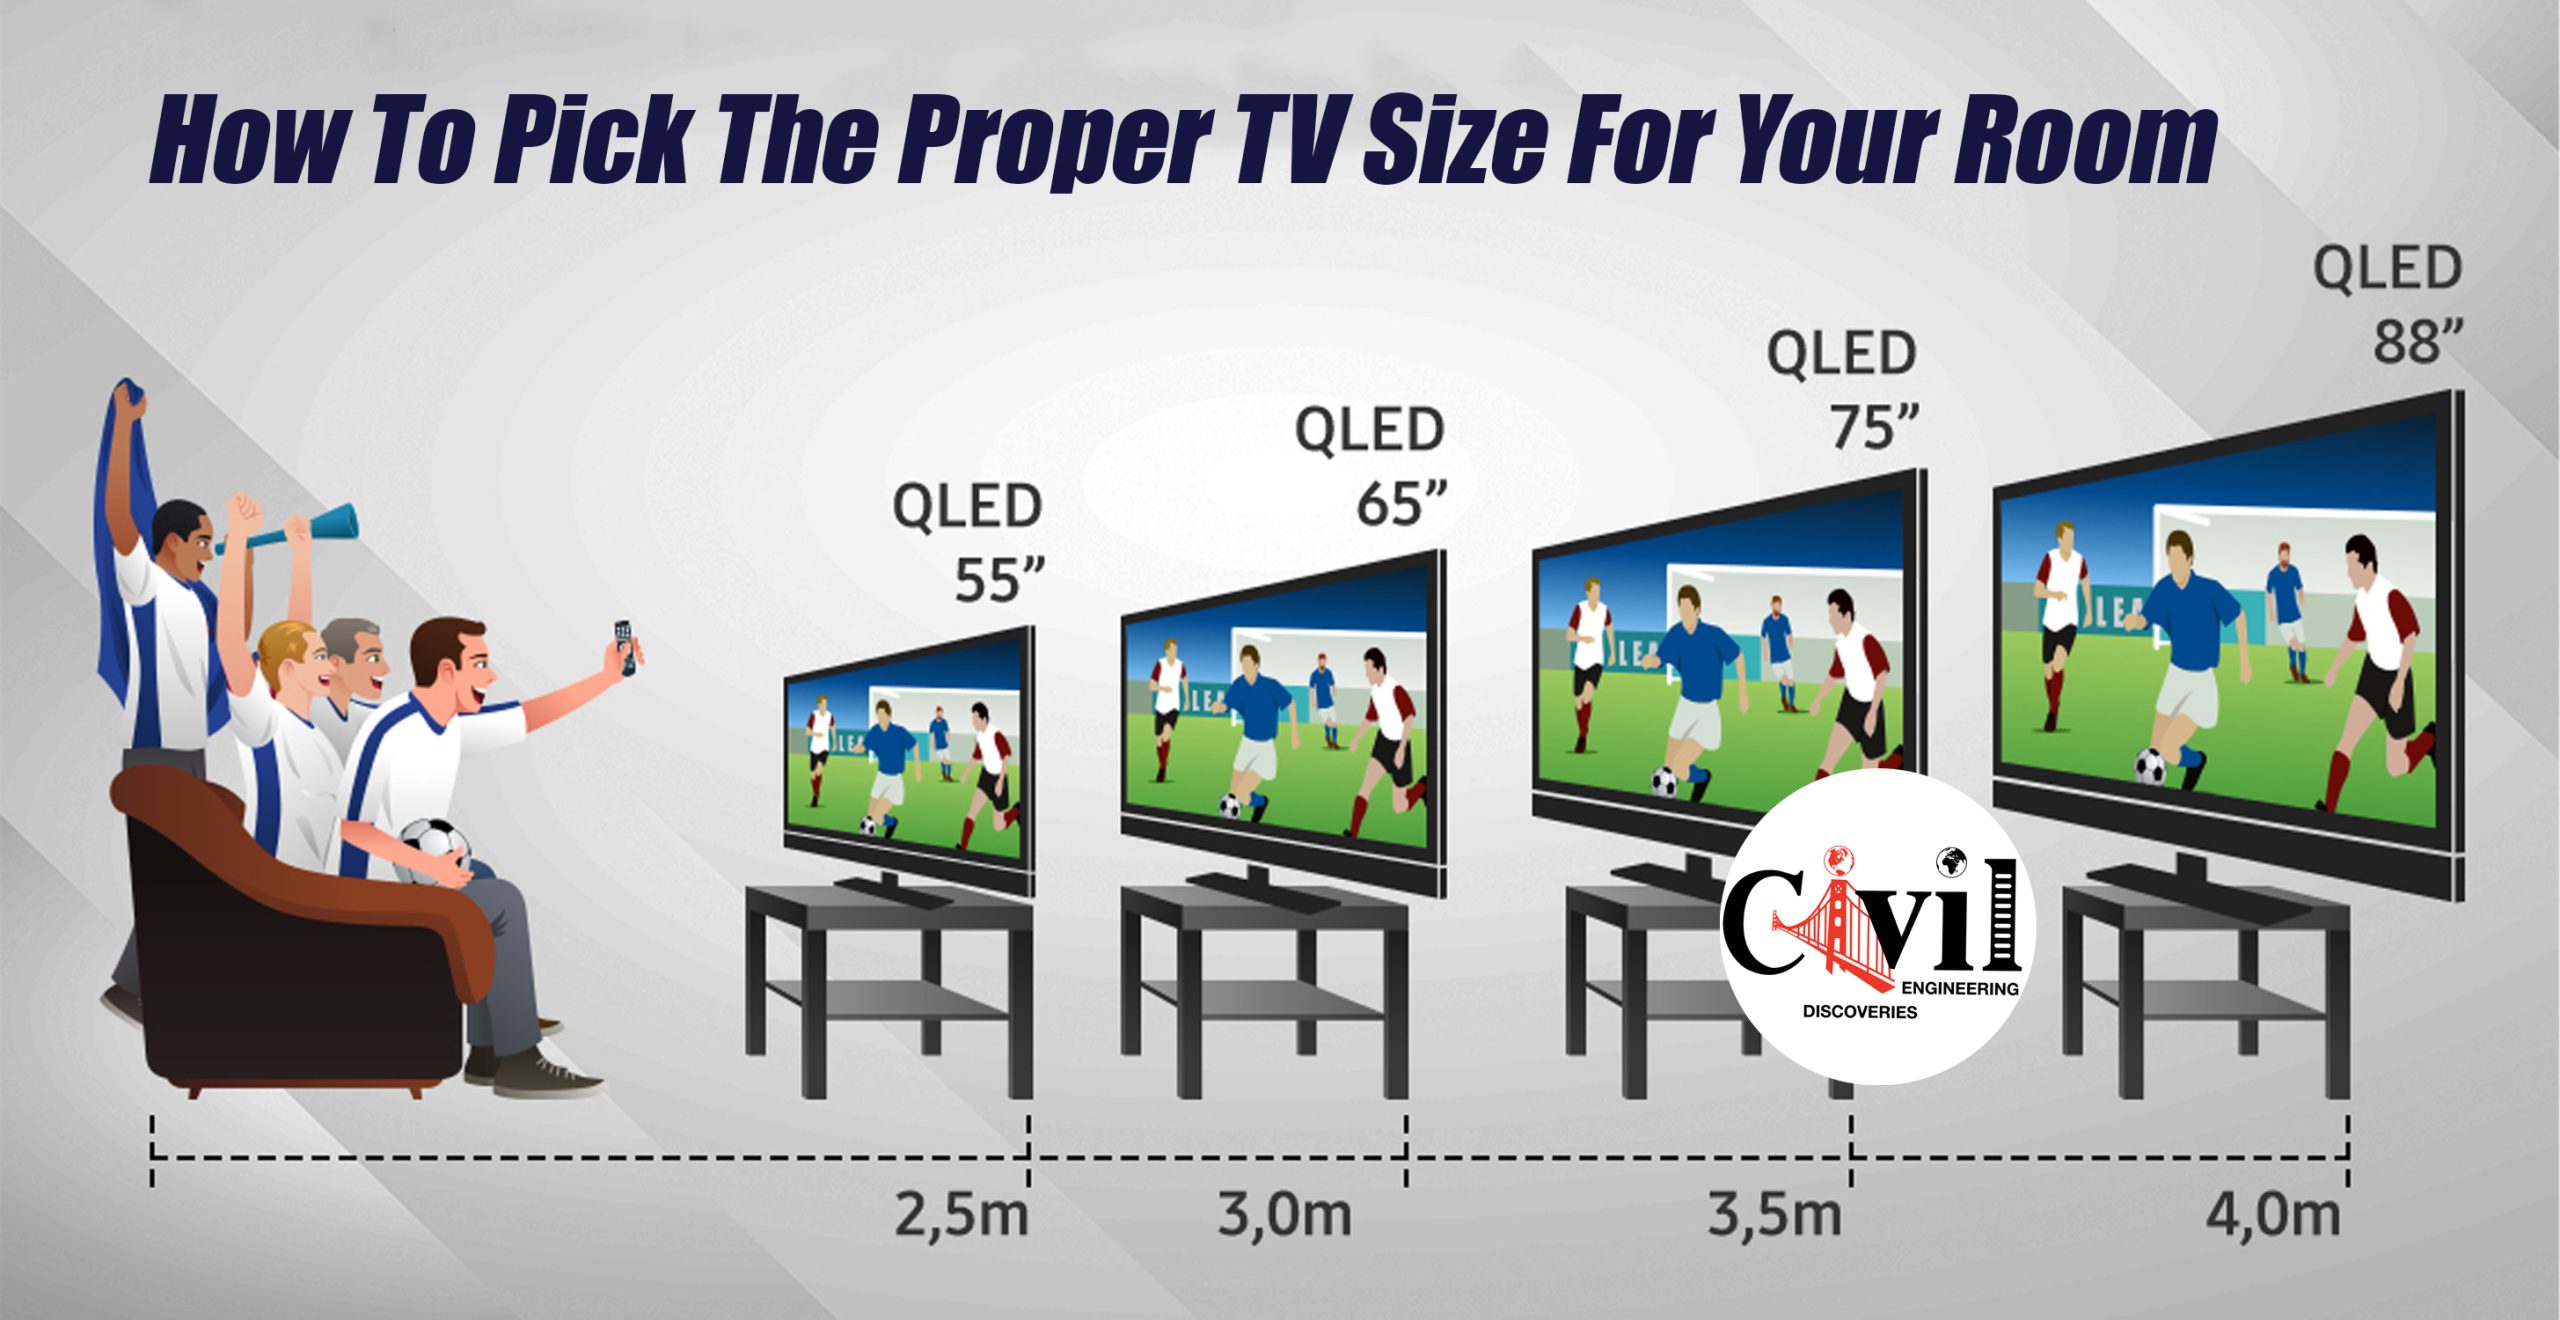 Proper Tv Size For Your Room